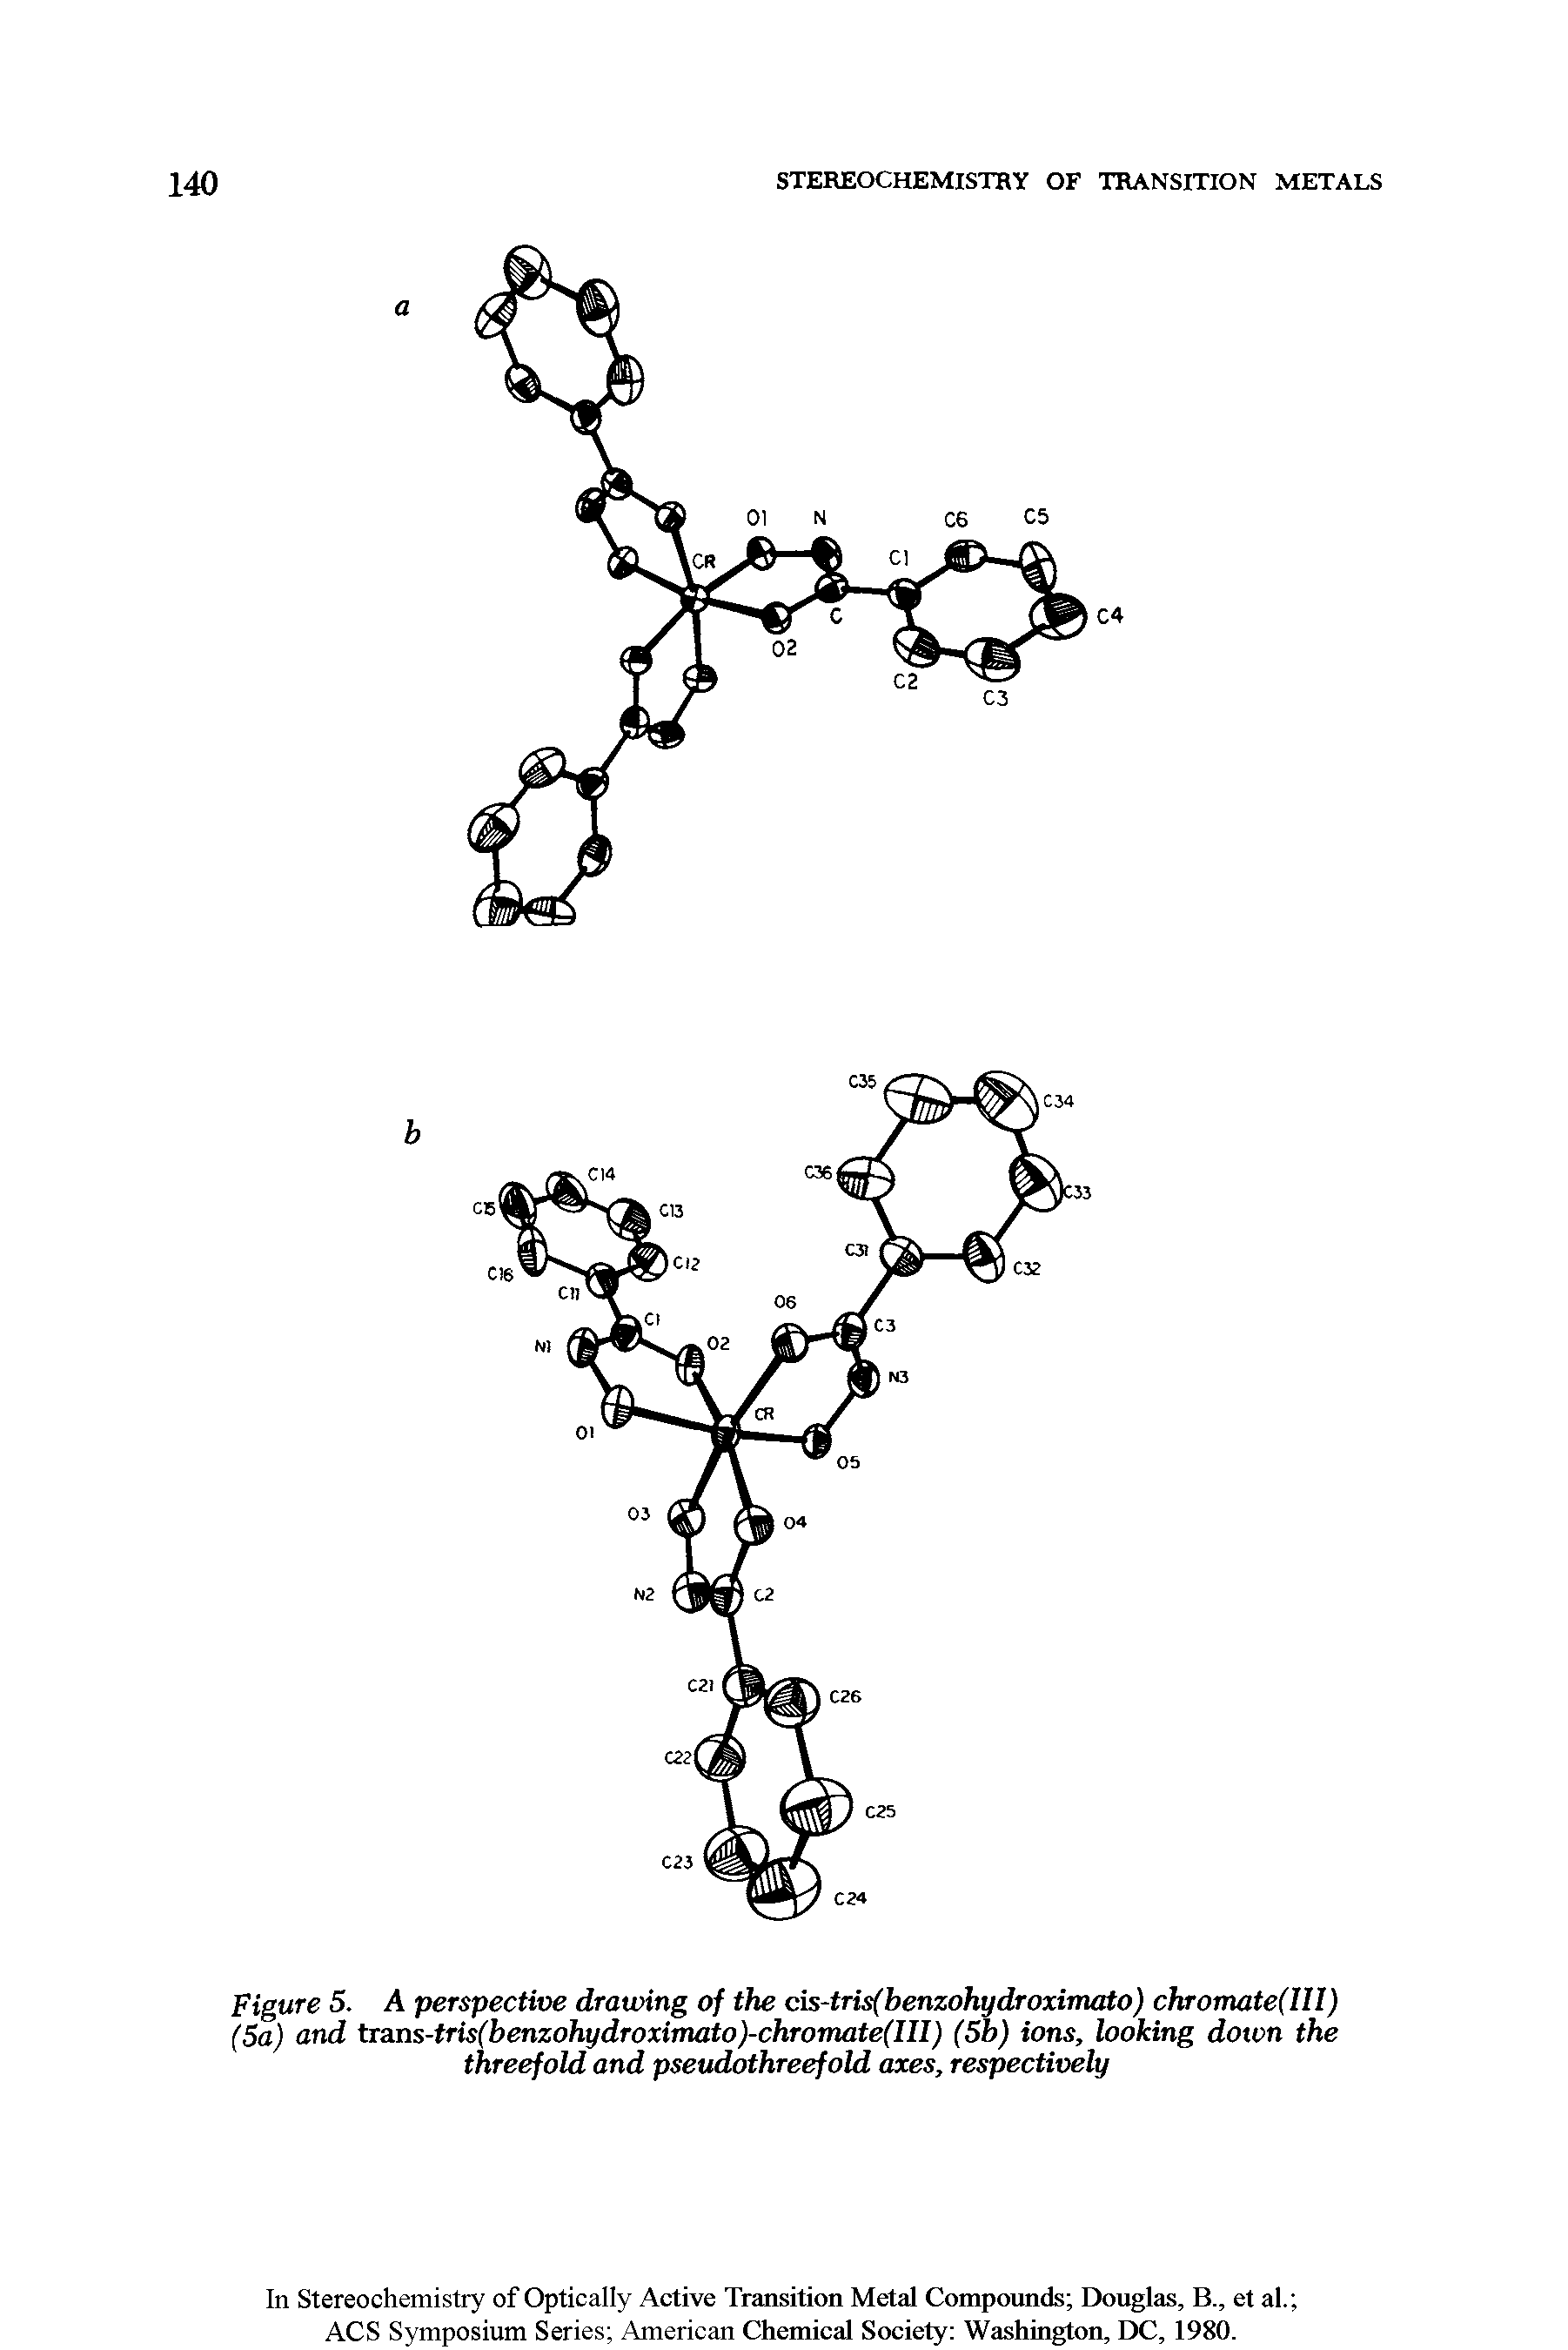 Figure 5. A perspective drawing of the cis-trisfbenzohydroximato) chromate(III) (5a) and trans-tris(benzohydroximato)-chromate(III) (5b) ions, looking down the threefold and pseudothreefold axes, respectively...